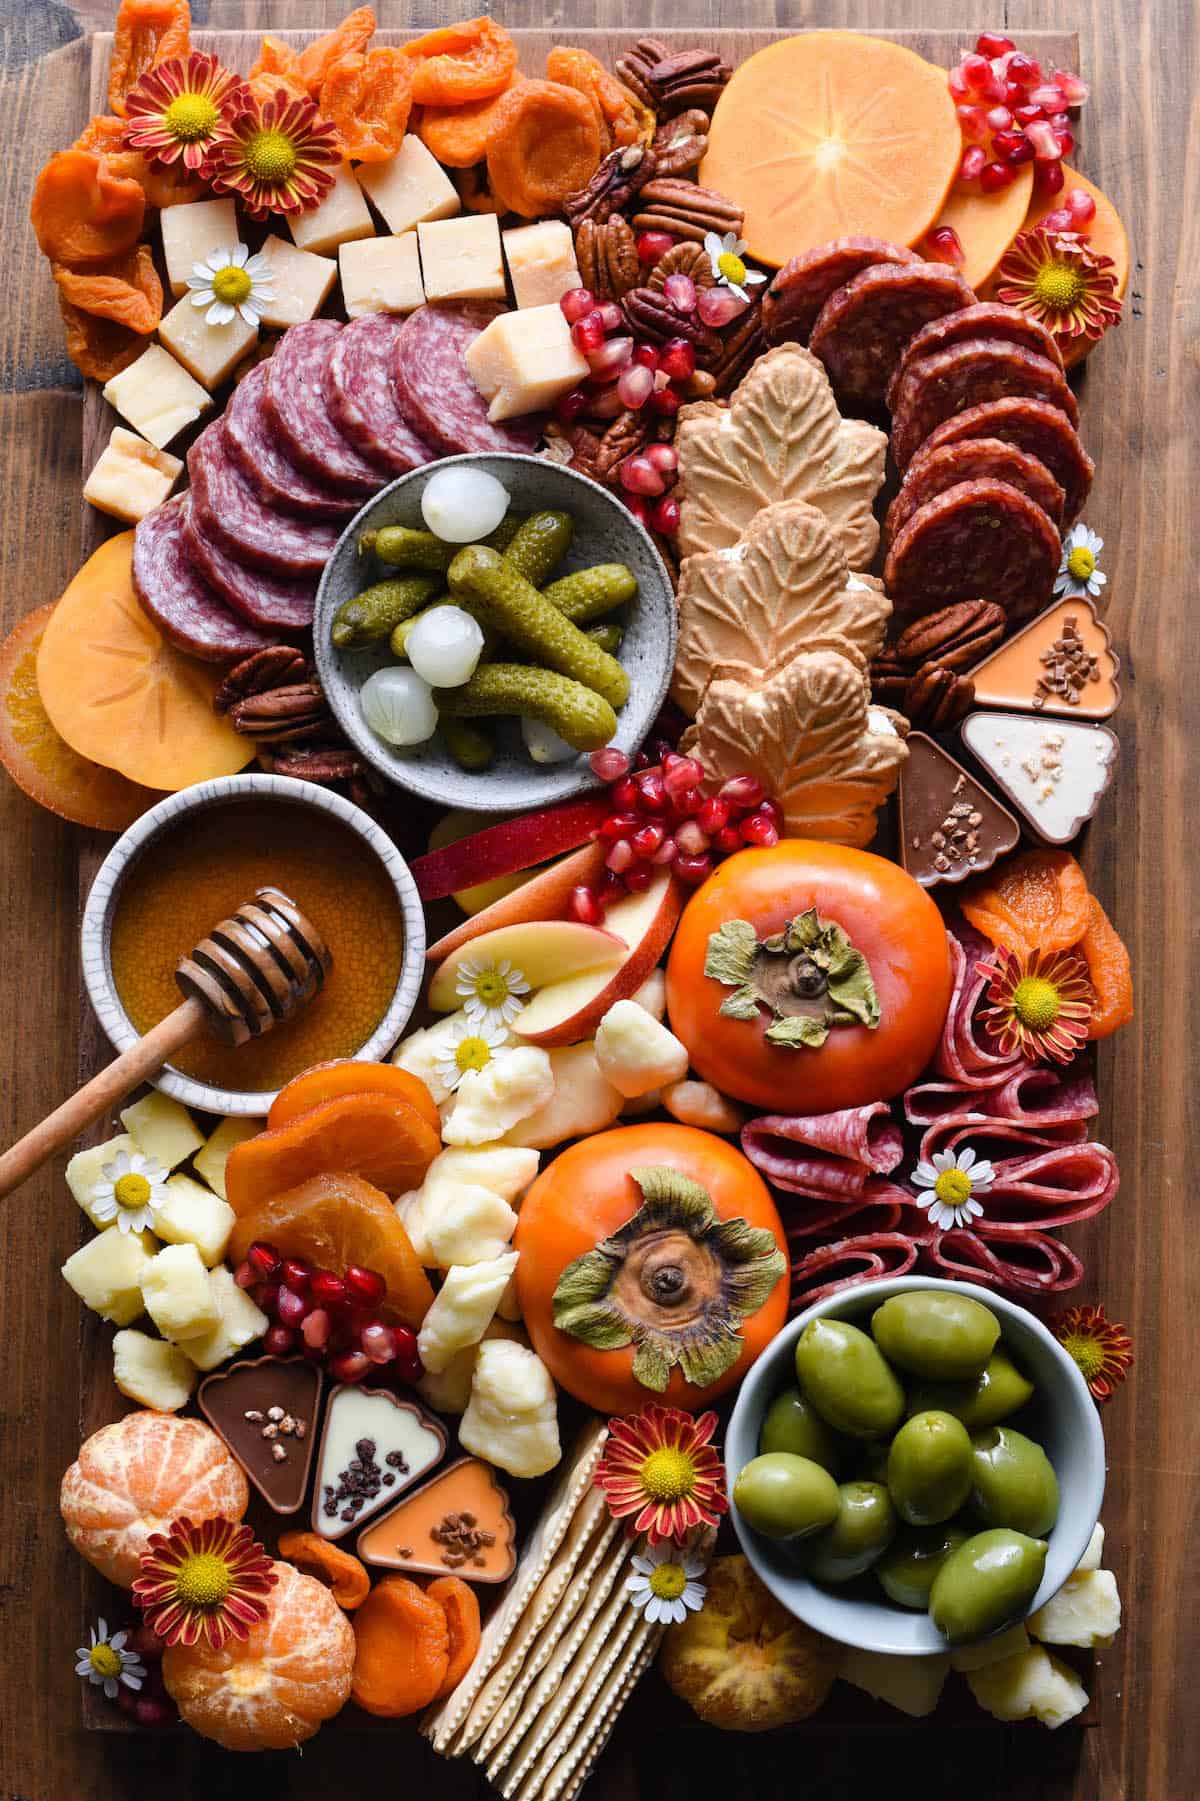 A fall themed charcuterie board with meats, cheeses, and sweets.